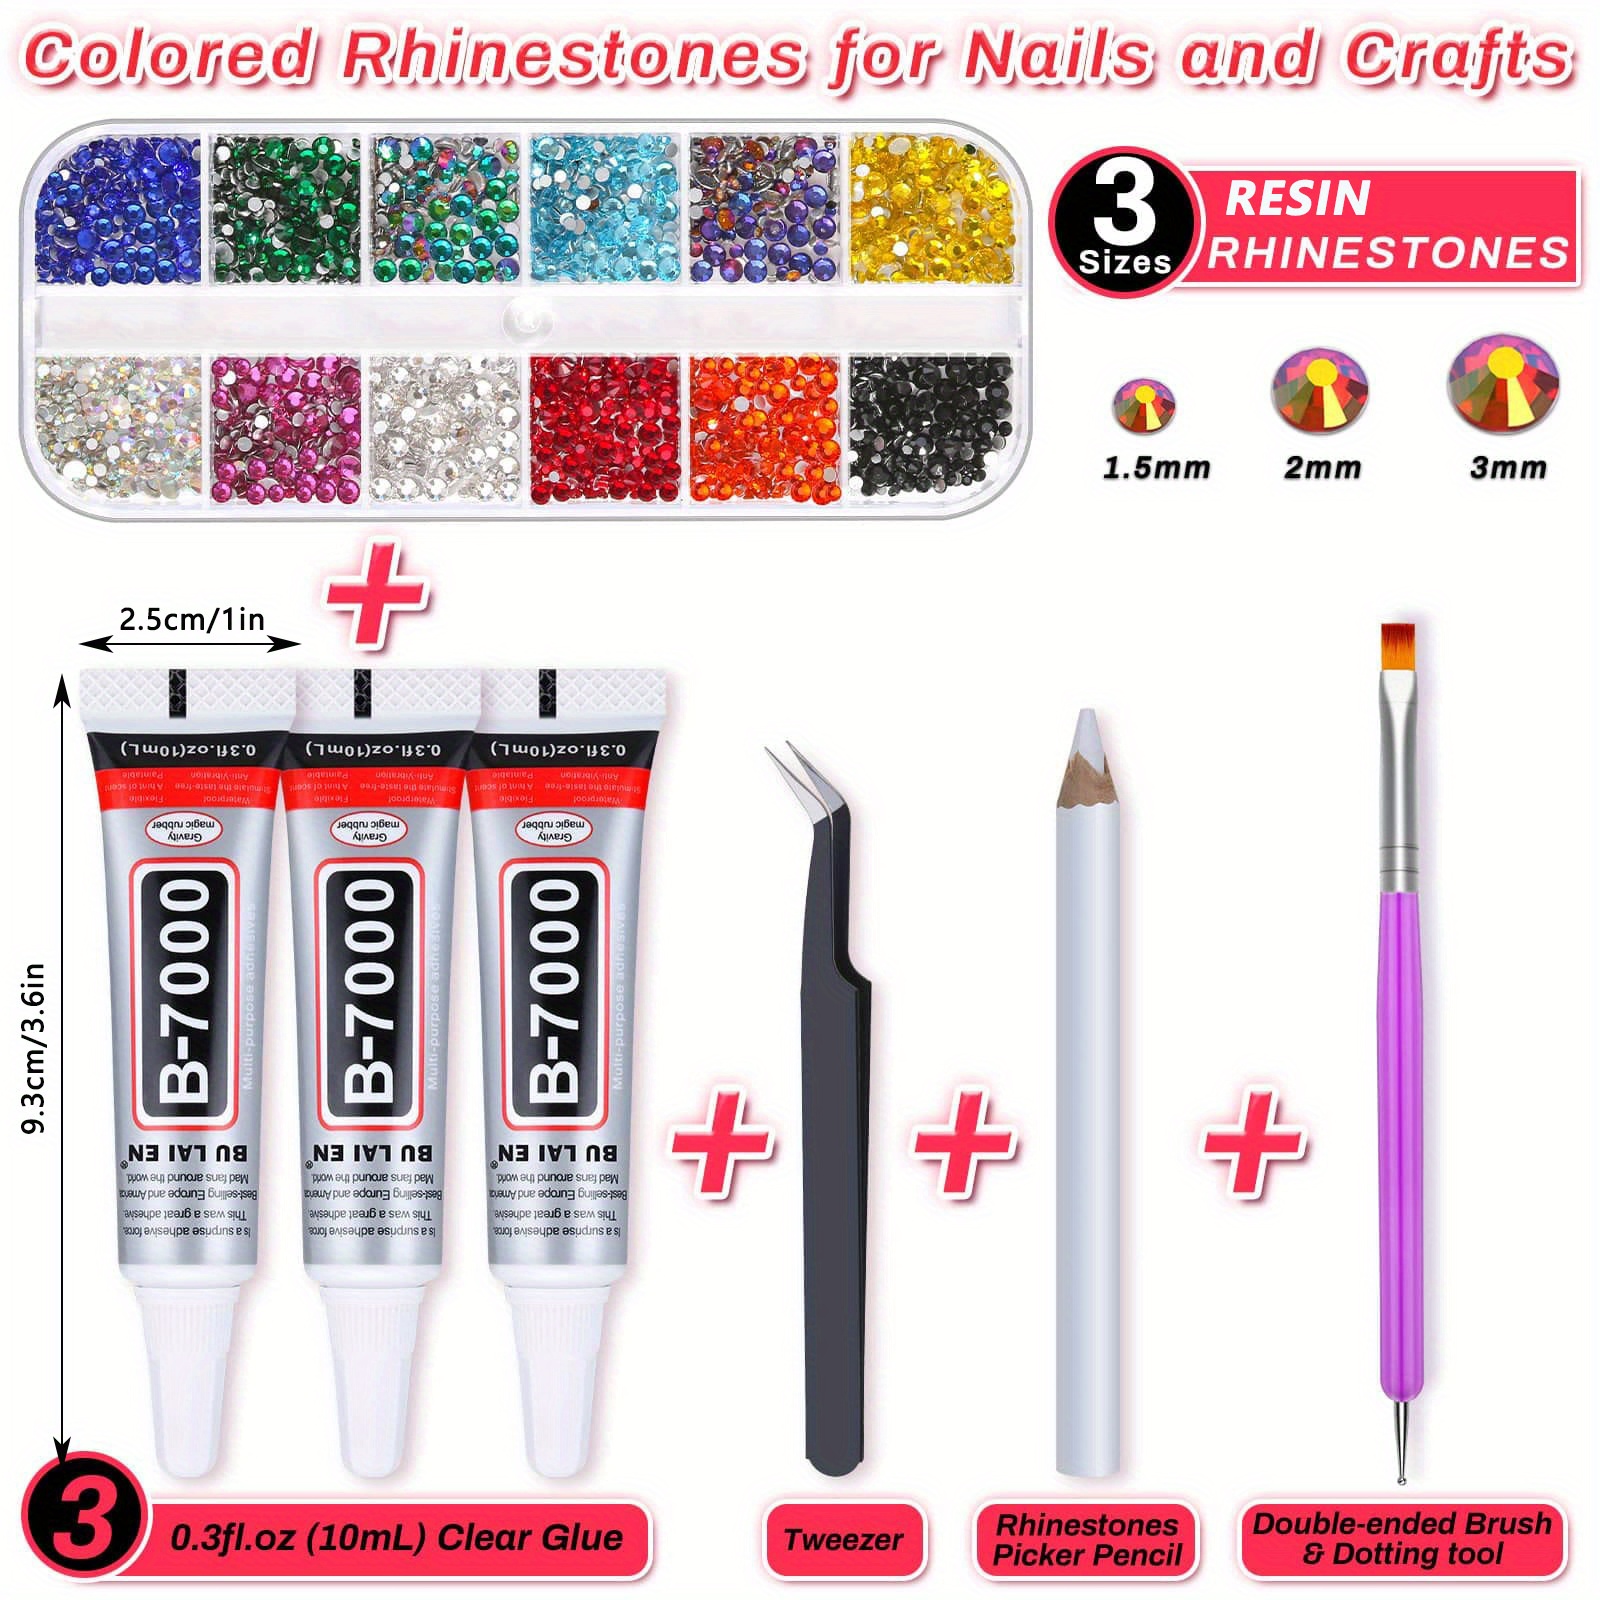 B7000 Jewelry Adhesive Glue with Rhinestones for Crafts, 2100Pcs Flat A. Clear